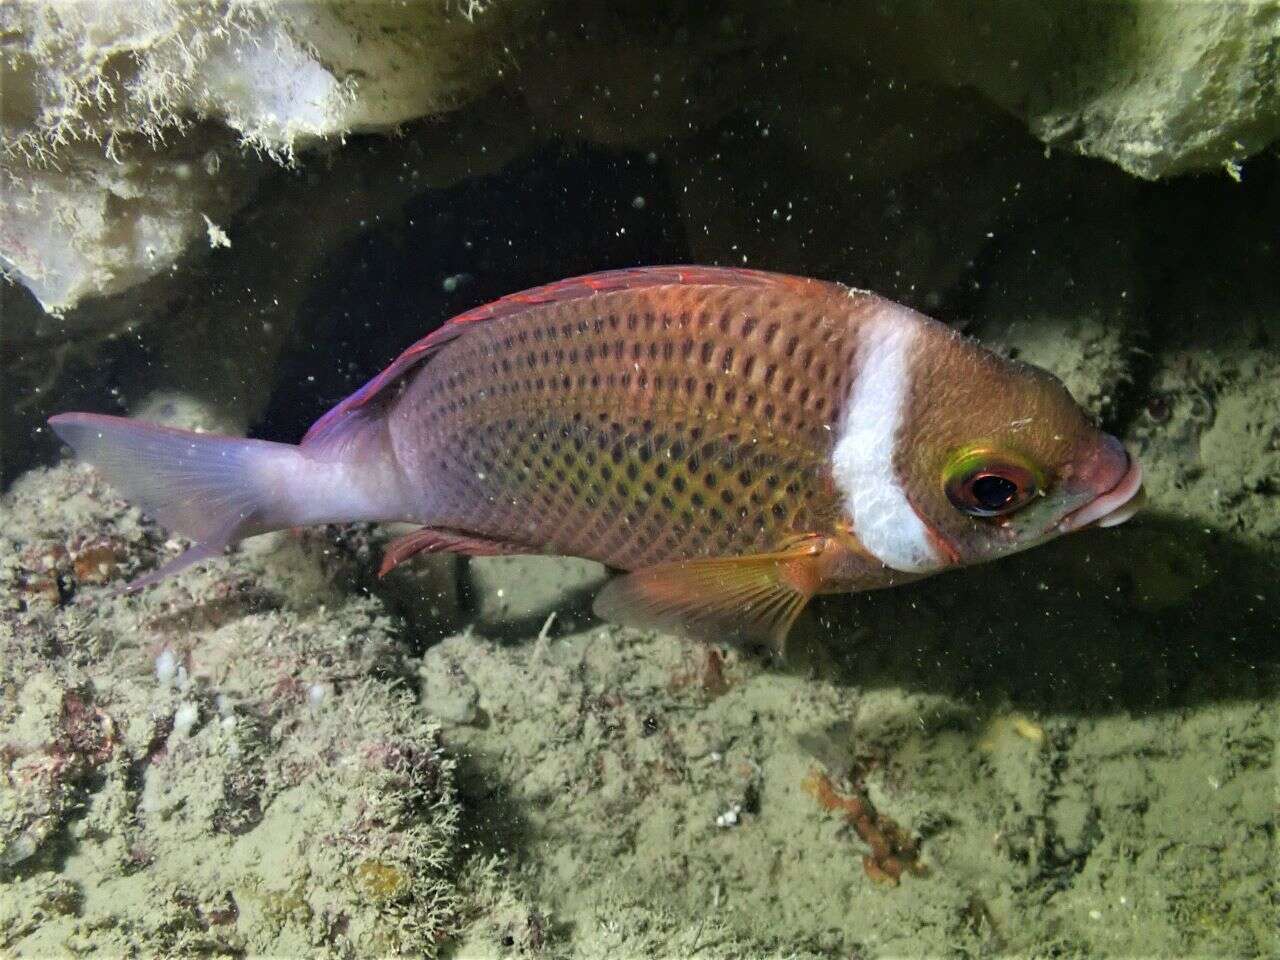 Image of Igcar monocle bream